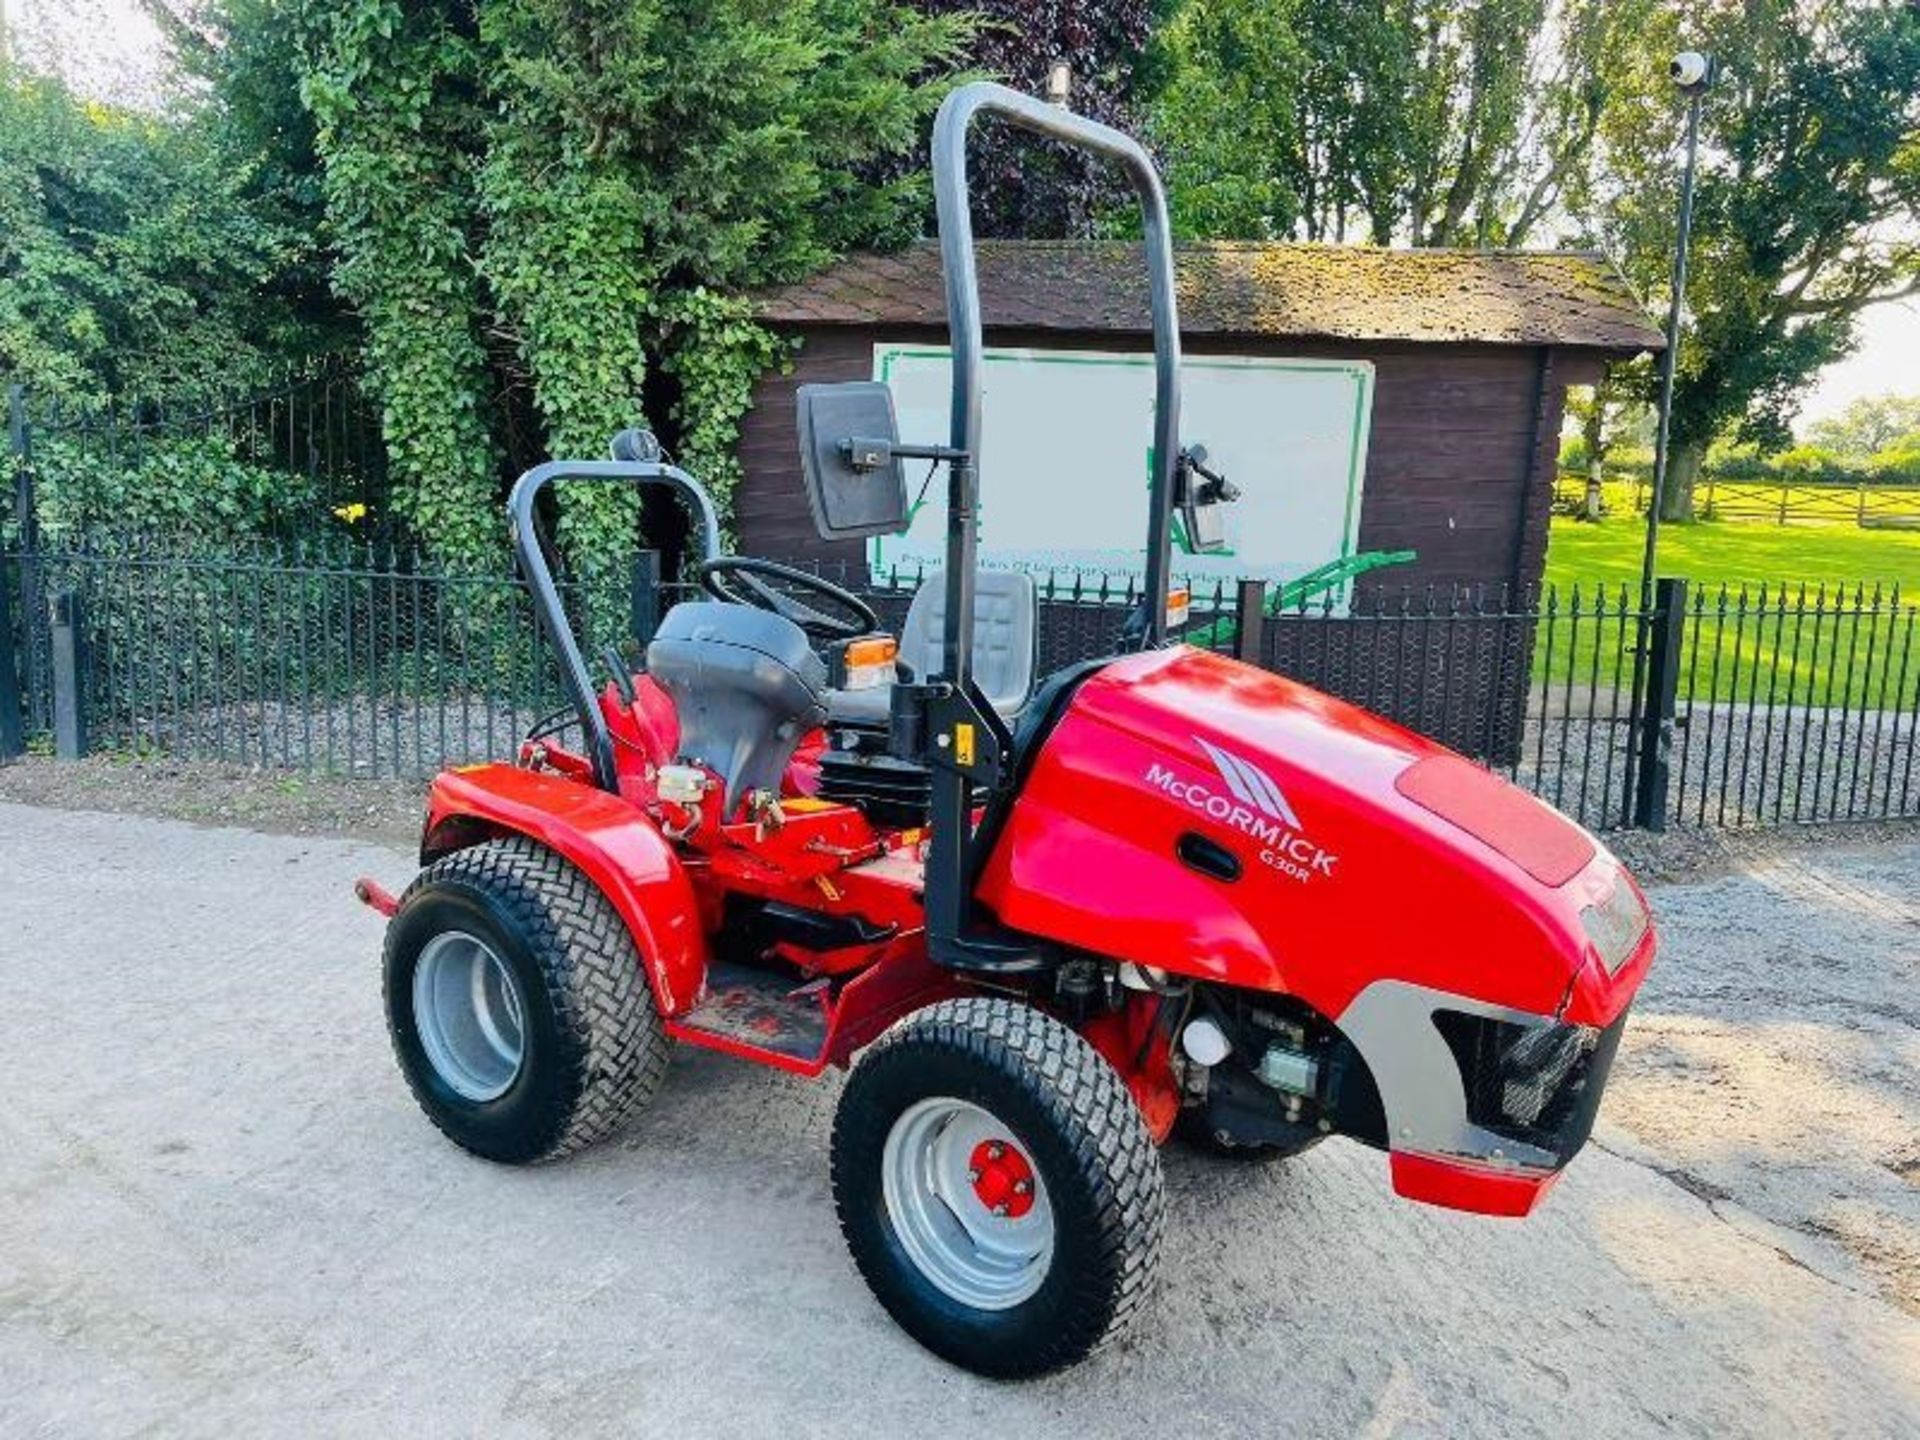 MCCORMICK G30R 4WD COMPACT TRACTOR *1368 HOURS* C/W REVERSE DRIVE